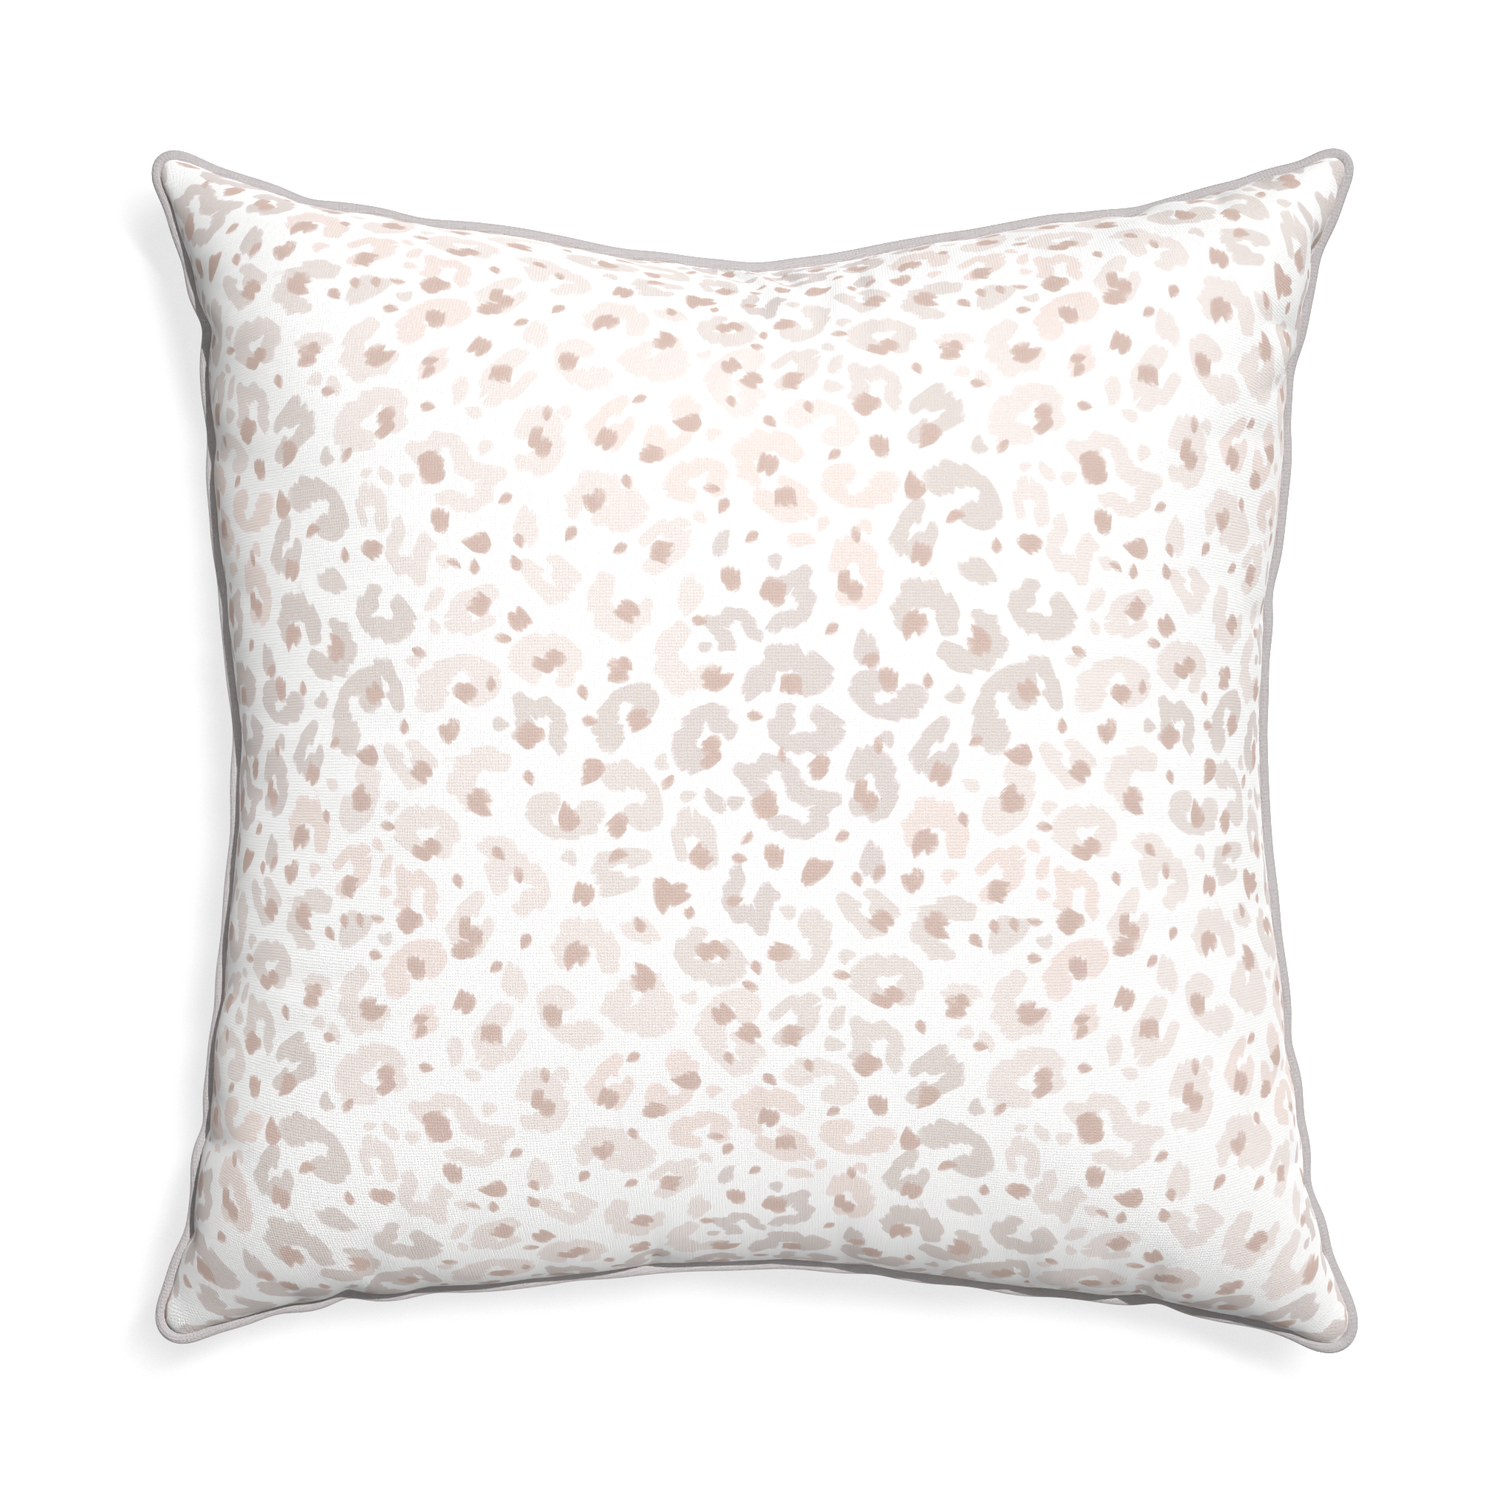 Euro-sham rosie custom pillow with pebble piping on white background